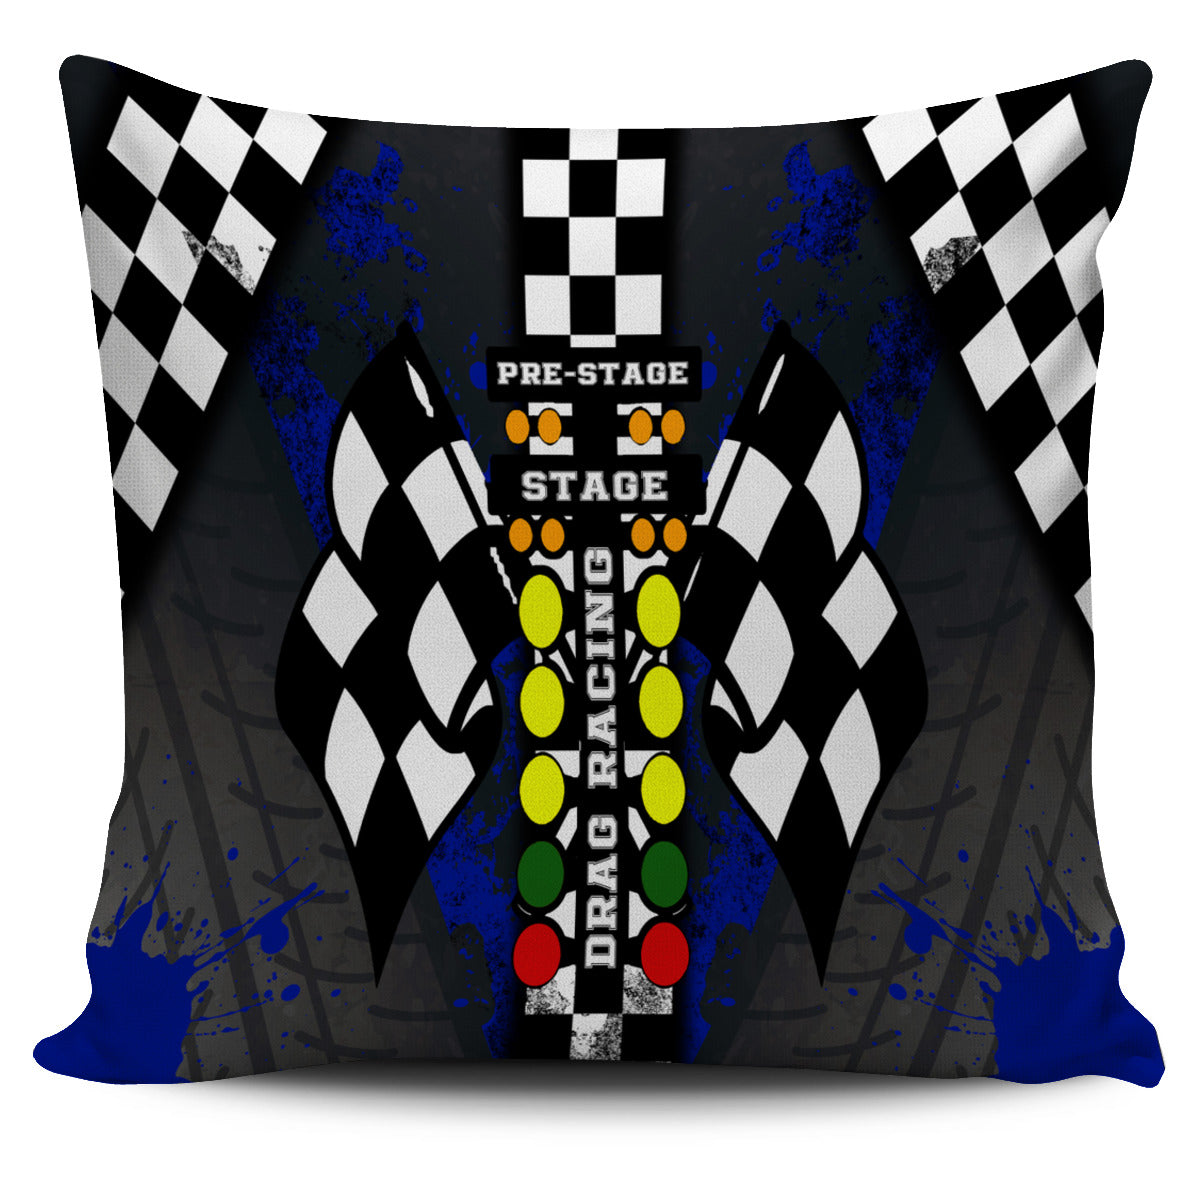 Drag Racing Pillow covers Blue